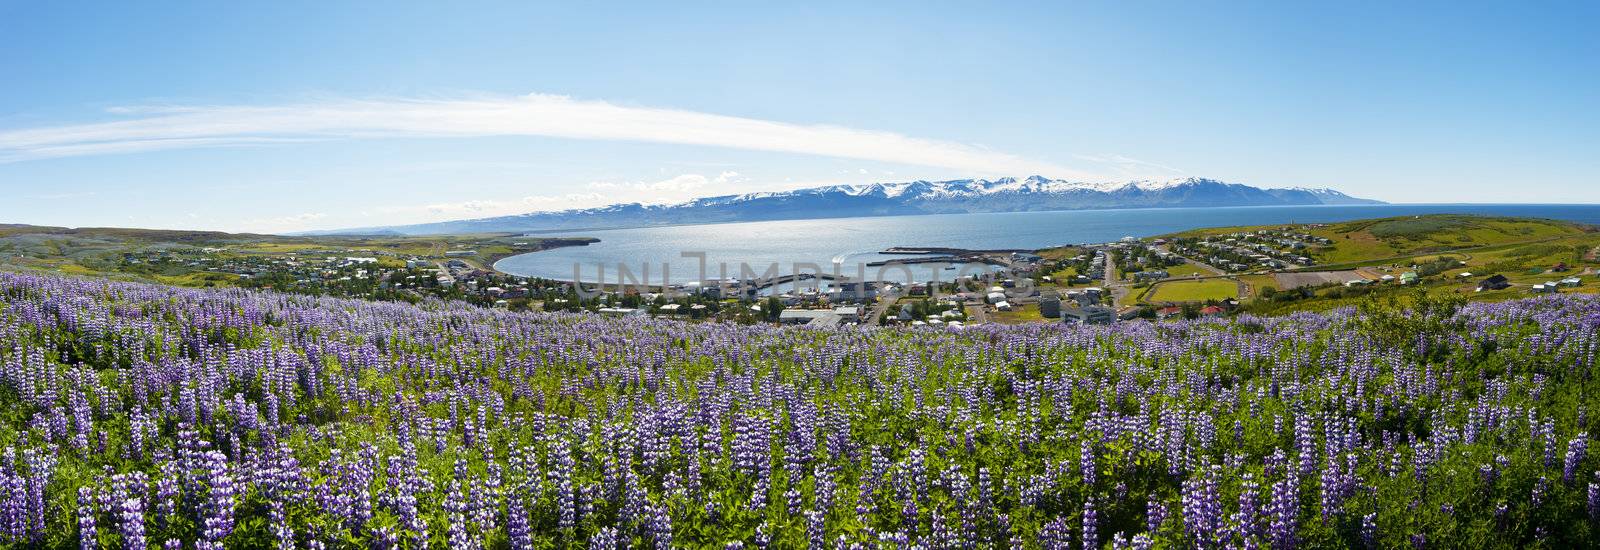 Meadows full of blooming Nootka lupin (Lupinus nootkatensis) above the harbor town of Husavik in the North of Iceland. The town is known for whale watching tours. Panoramic photo